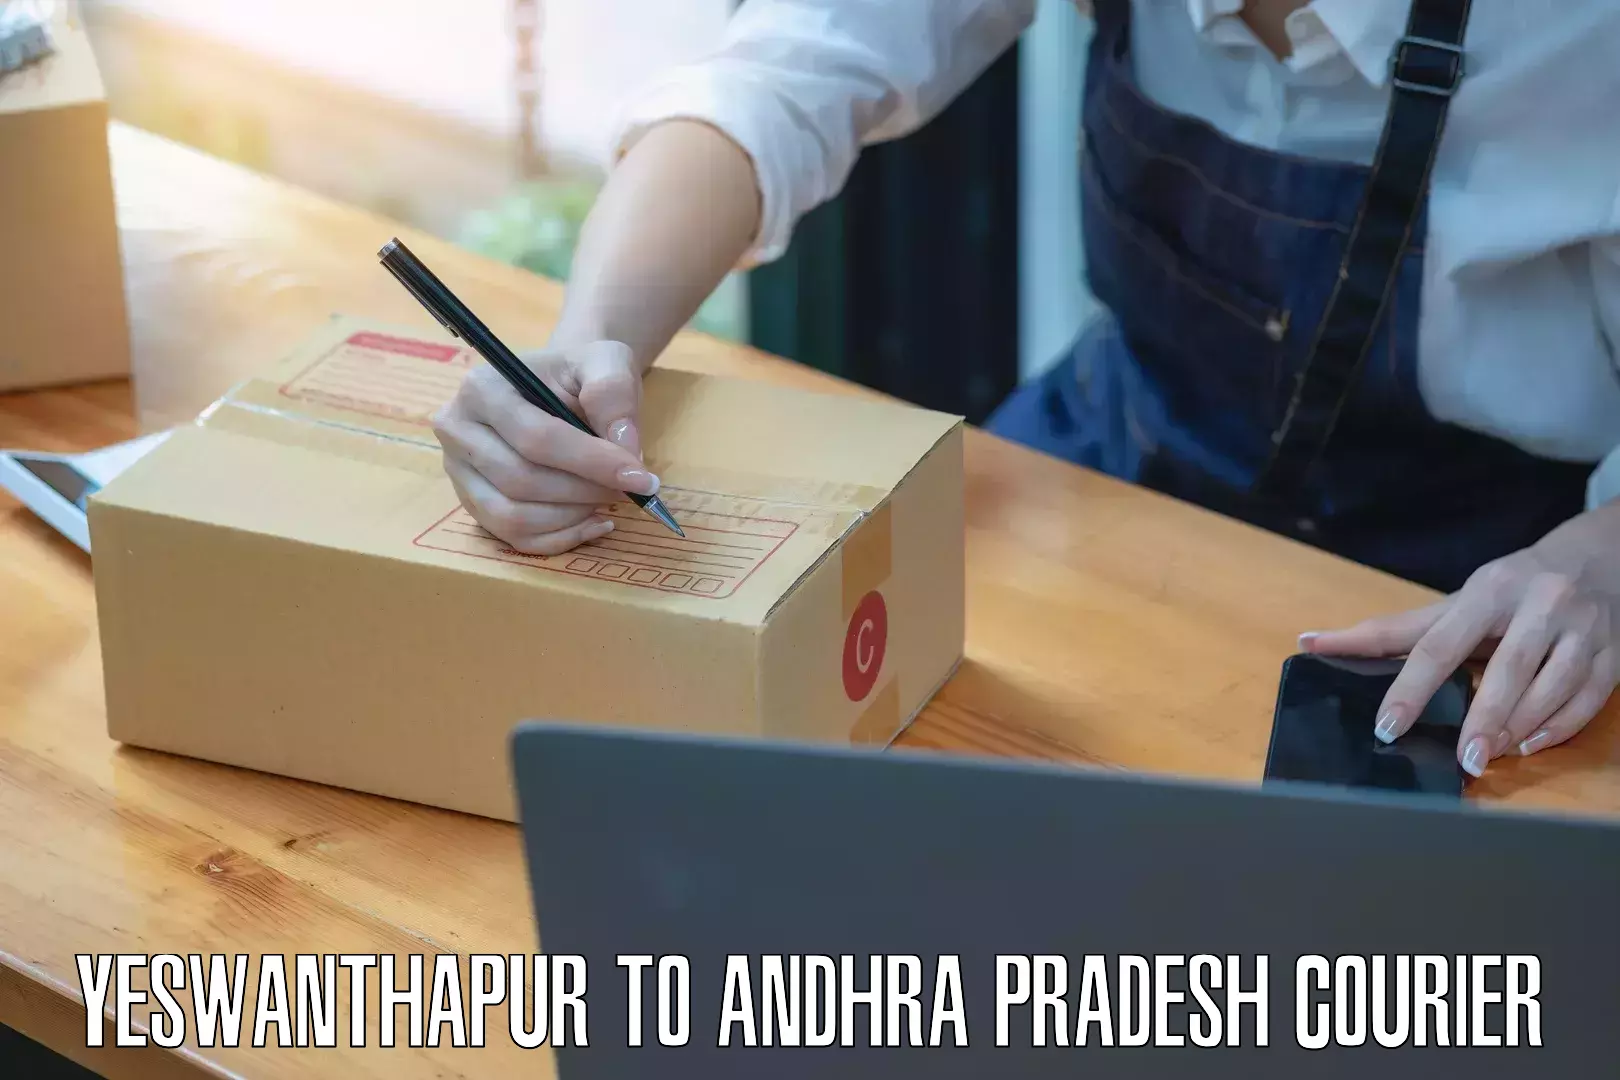 Efficient parcel tracking Yeswanthapur to Andhra Pradesh